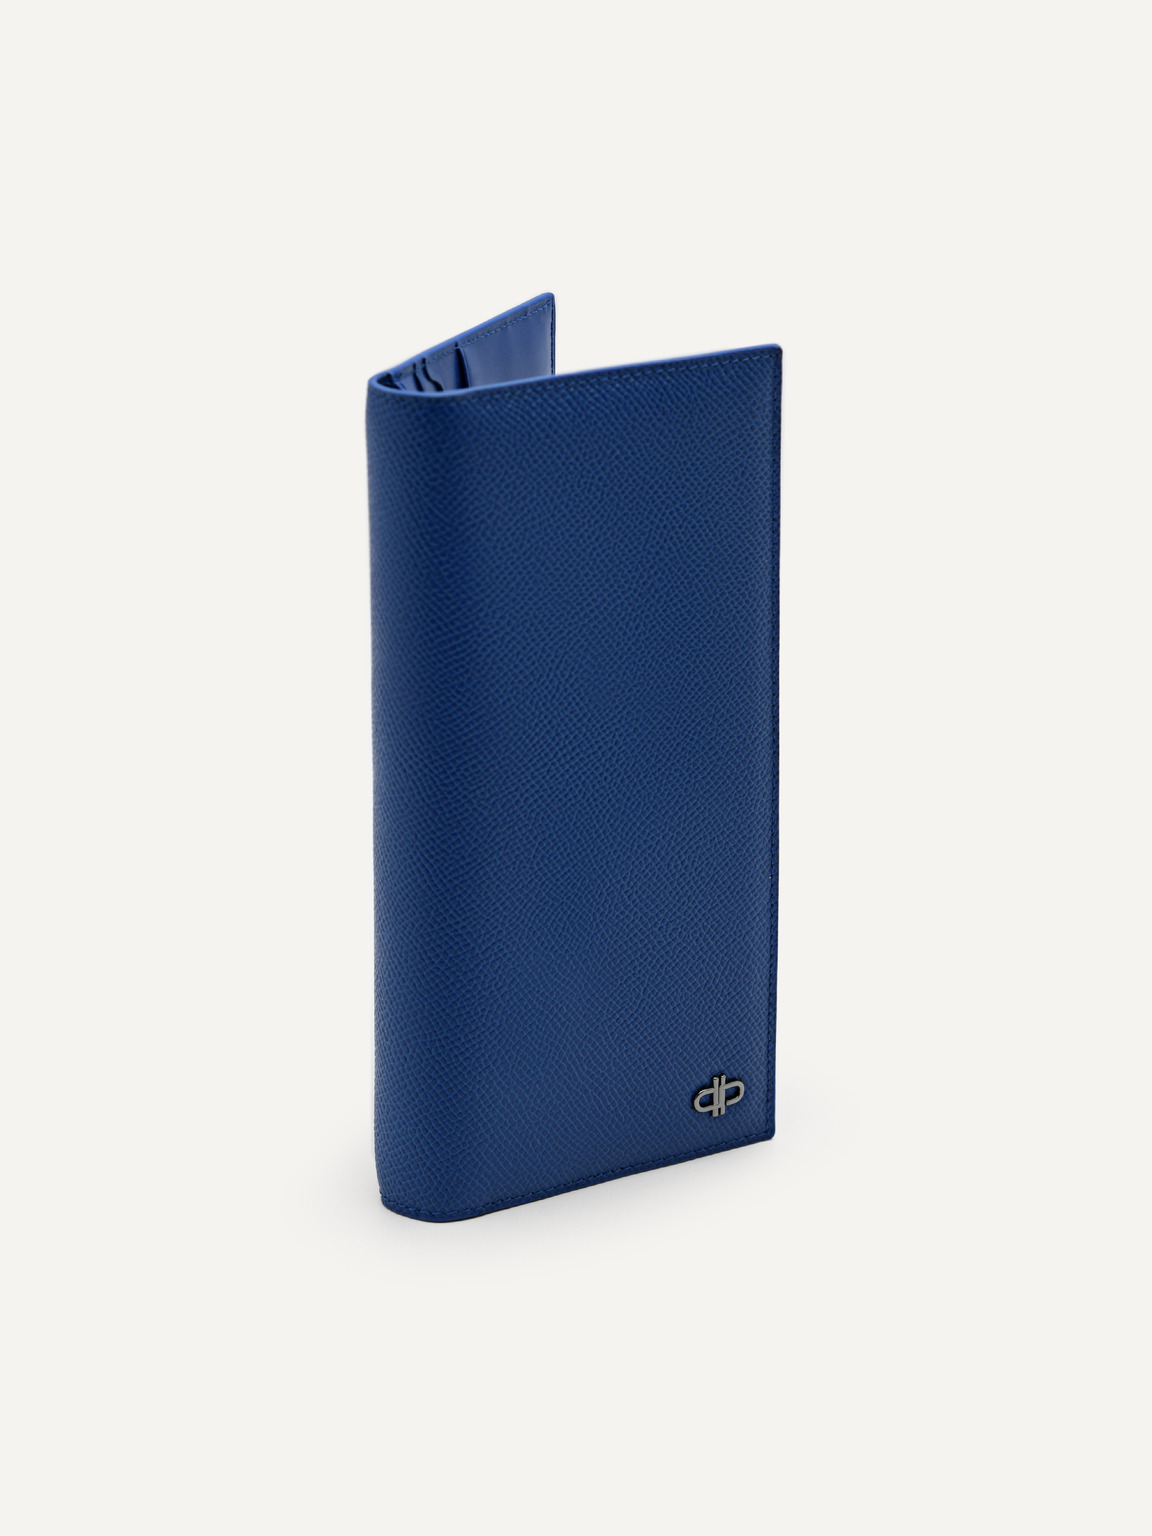 PEDRO Icon Leather Long Wallet, Navy